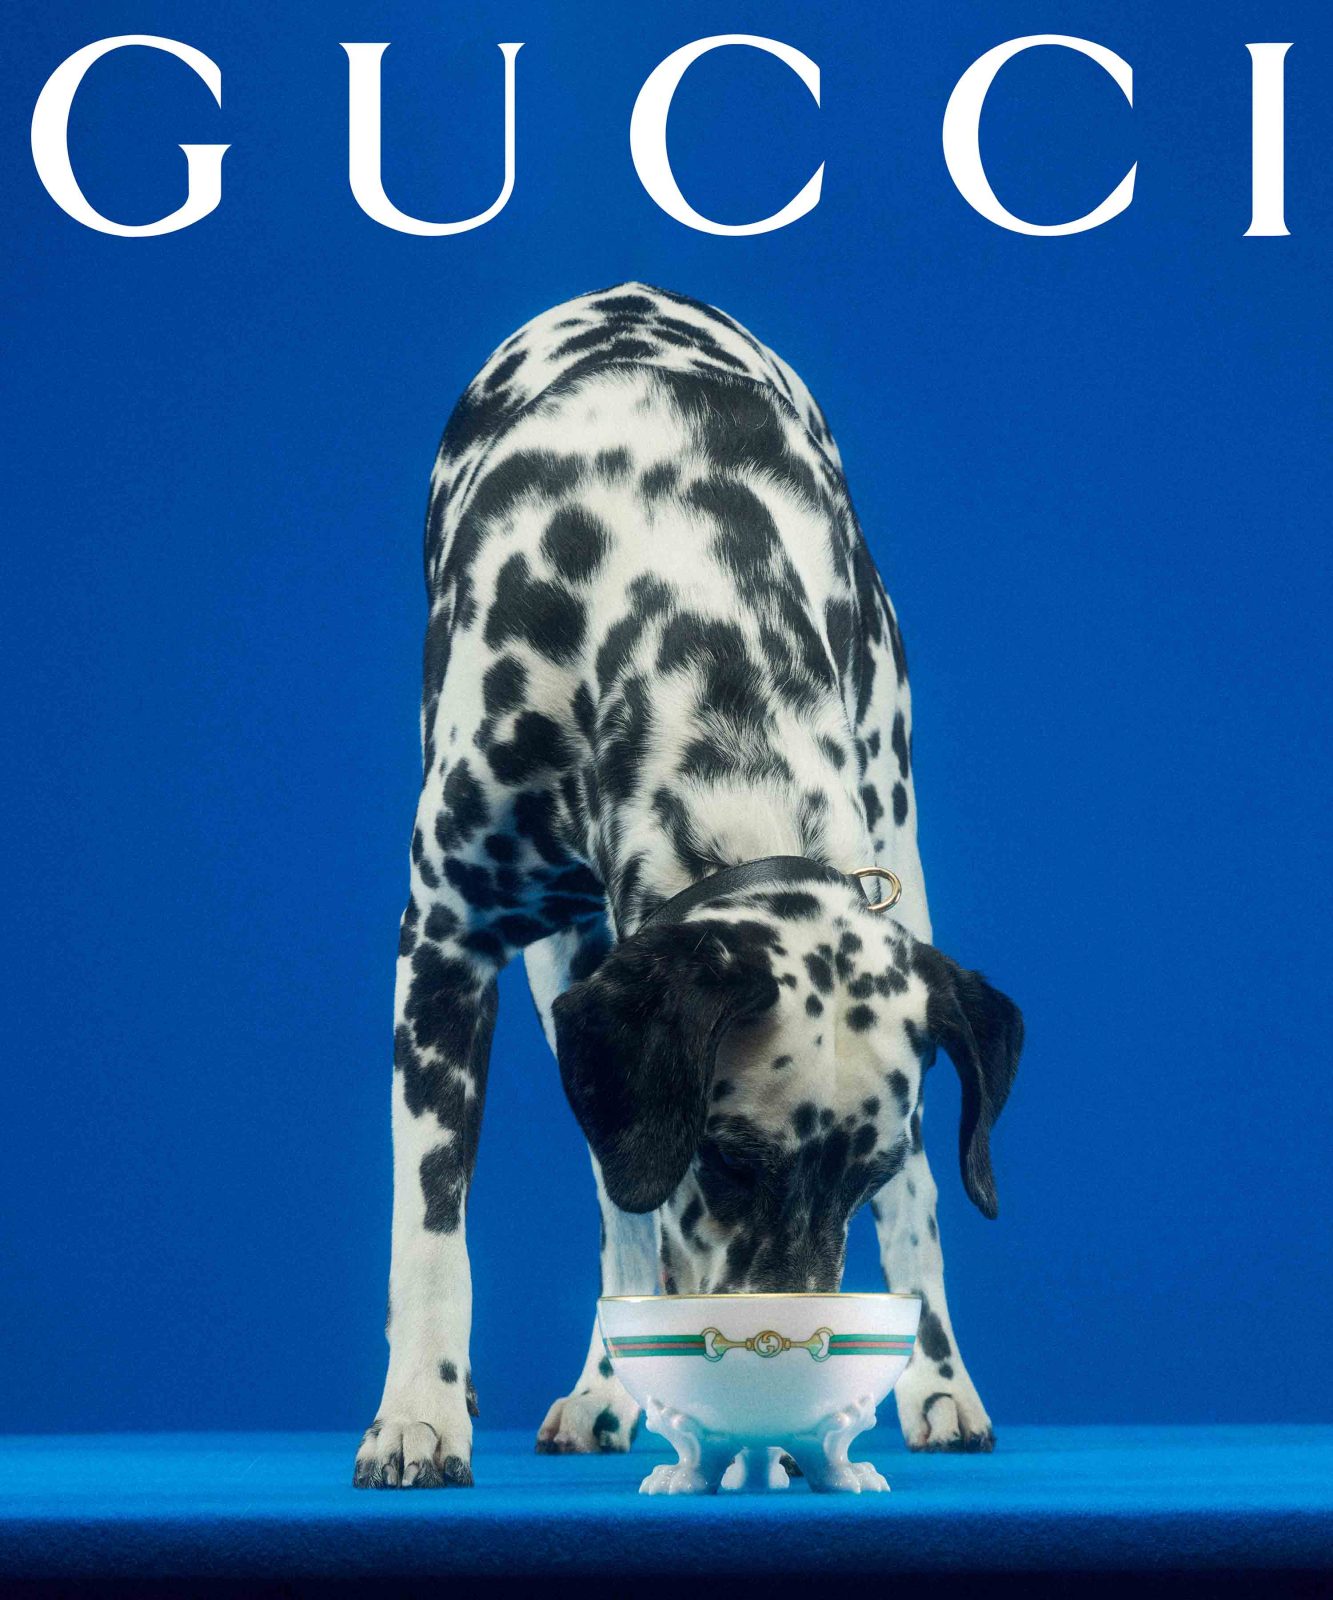 Is this the most glamorous pet collection ever?